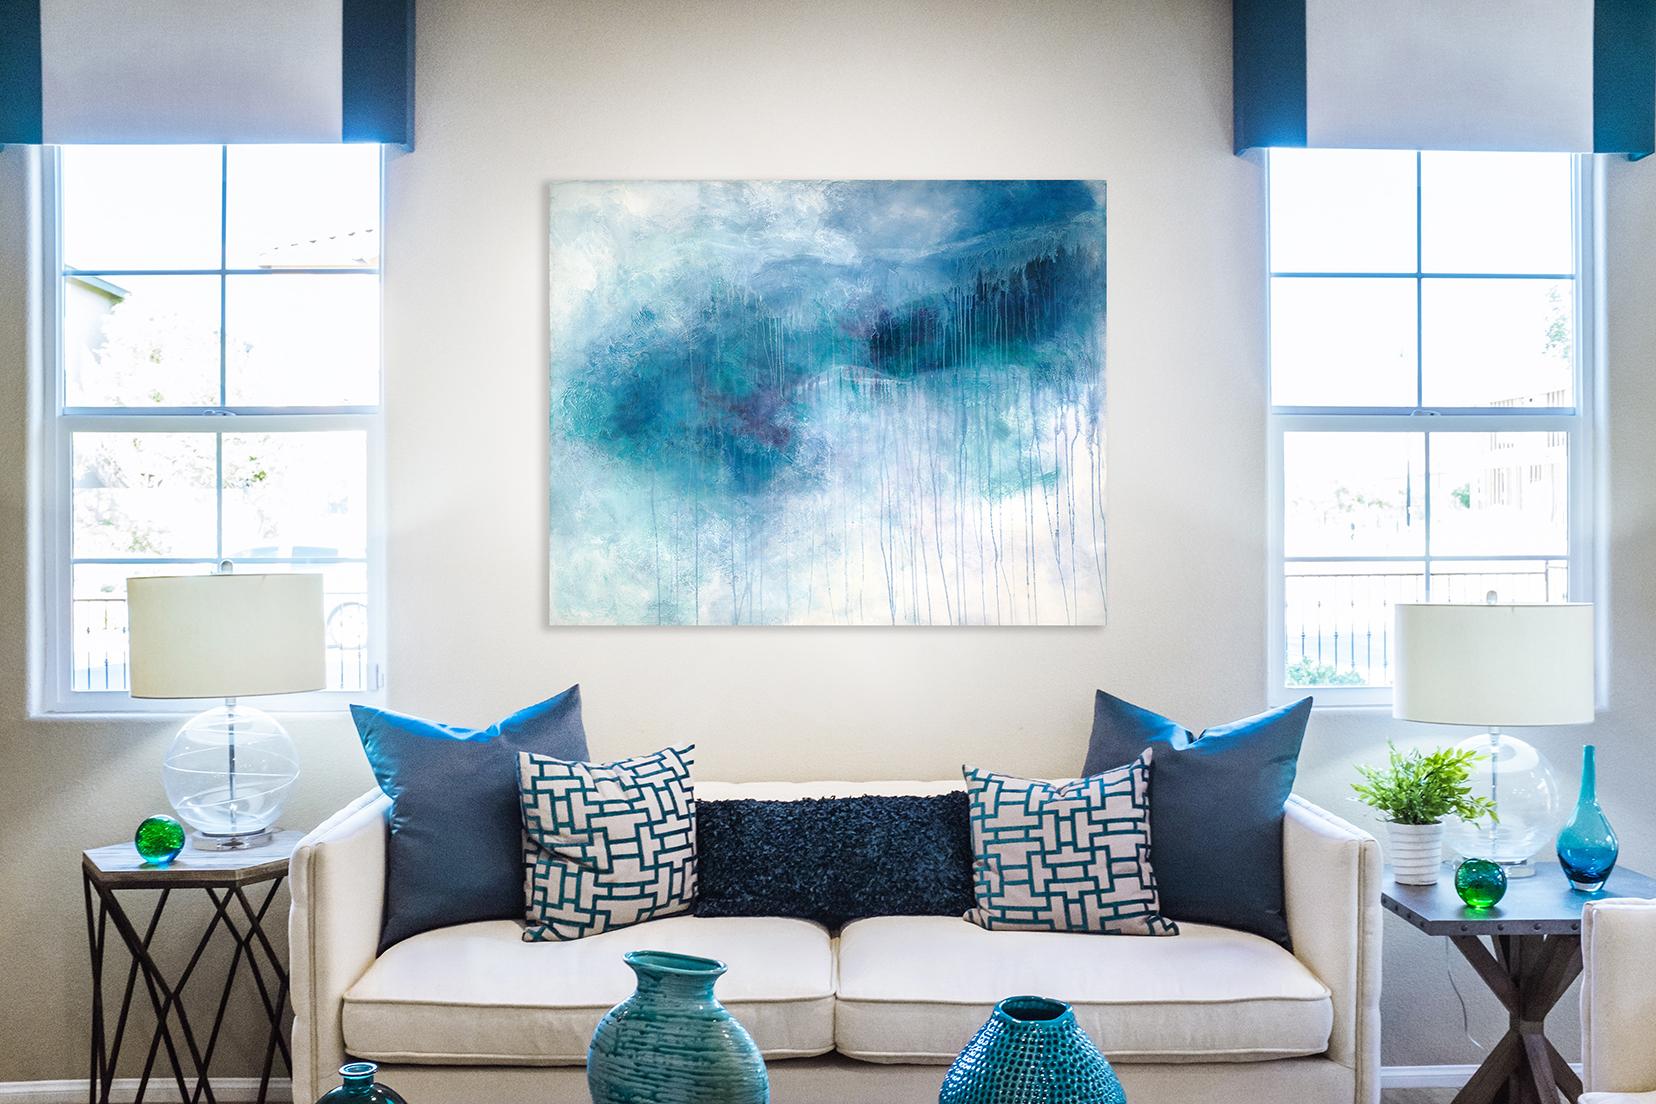 A calm after a storm. snowscape, abstracted, gestural abstraction, drip, drips, minimalist, contemporary, Blue and white collide in this water-snow like abstract painting. Artistic influences: Pat Steir.

Teodora Guererra received her Bachelor of